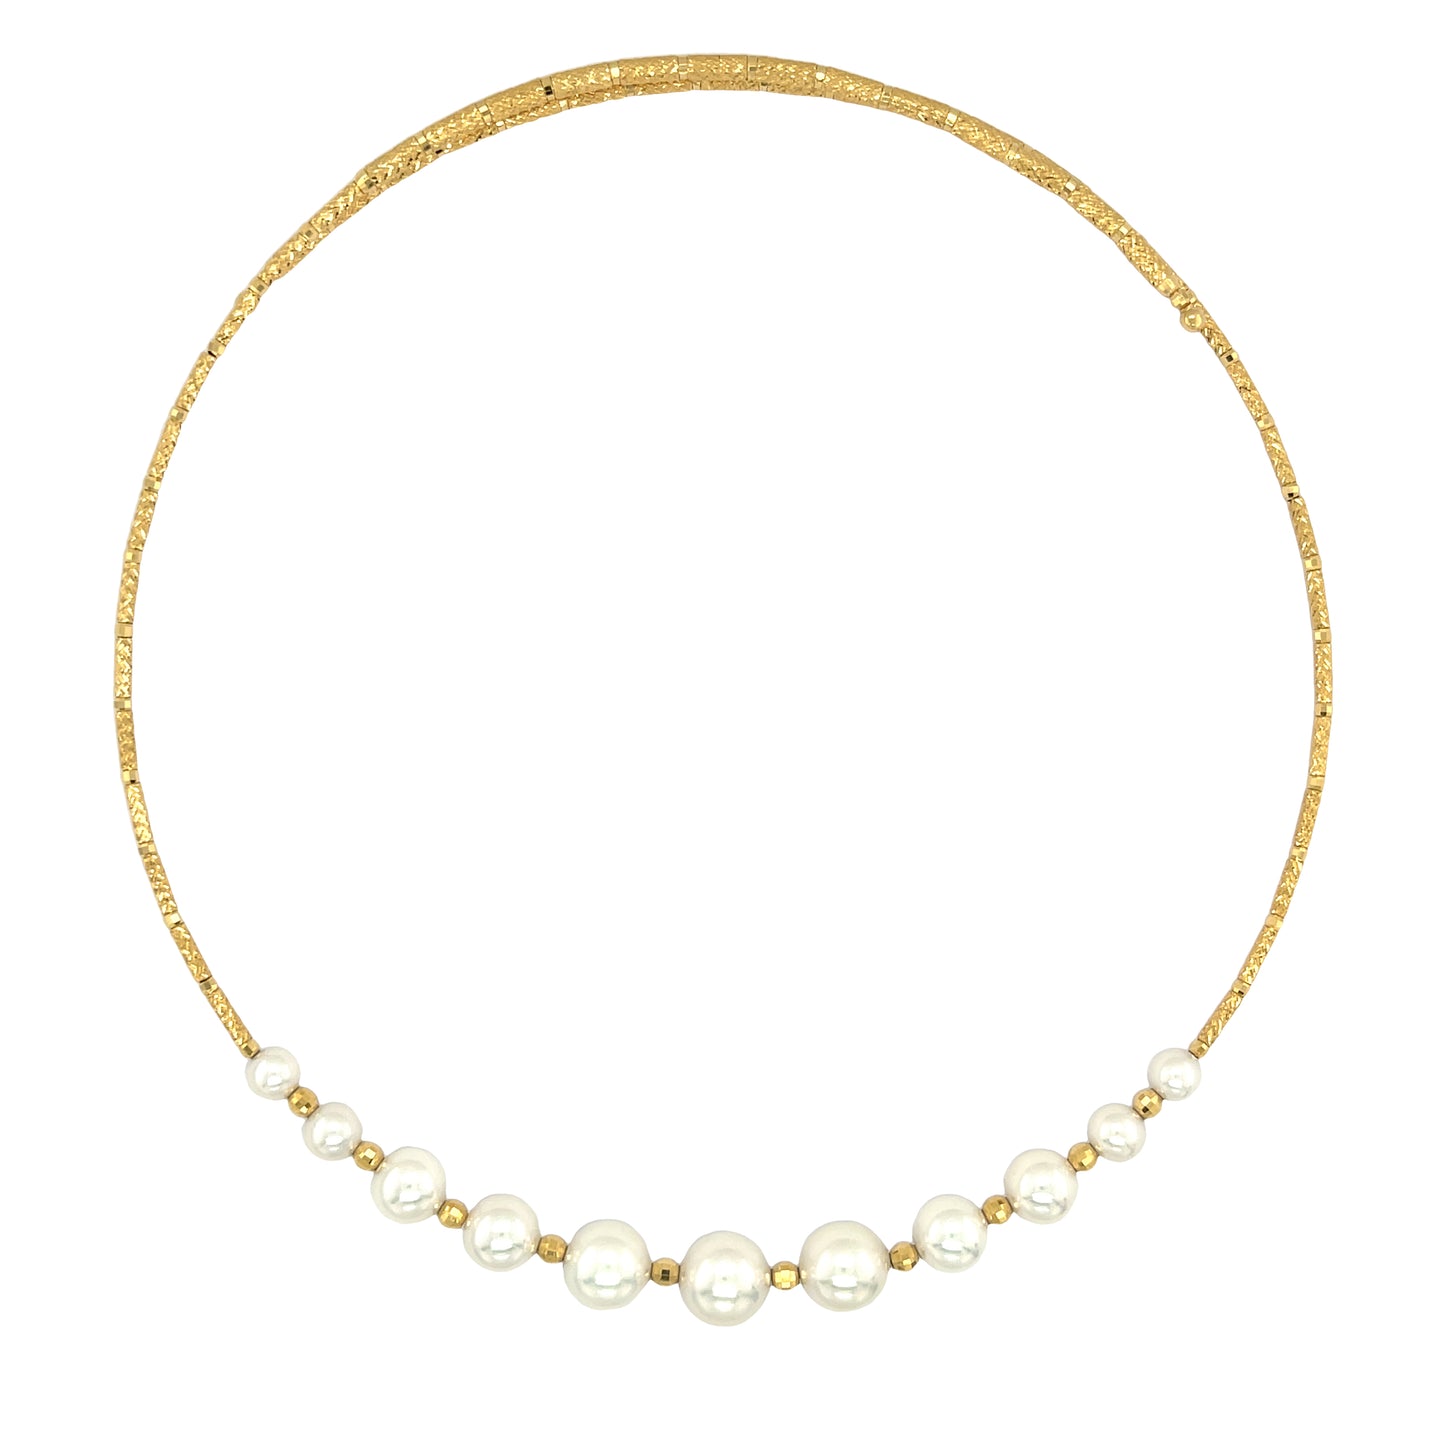 Akoya Pearl Magnetic Necklace - K.S. Sze & Sons